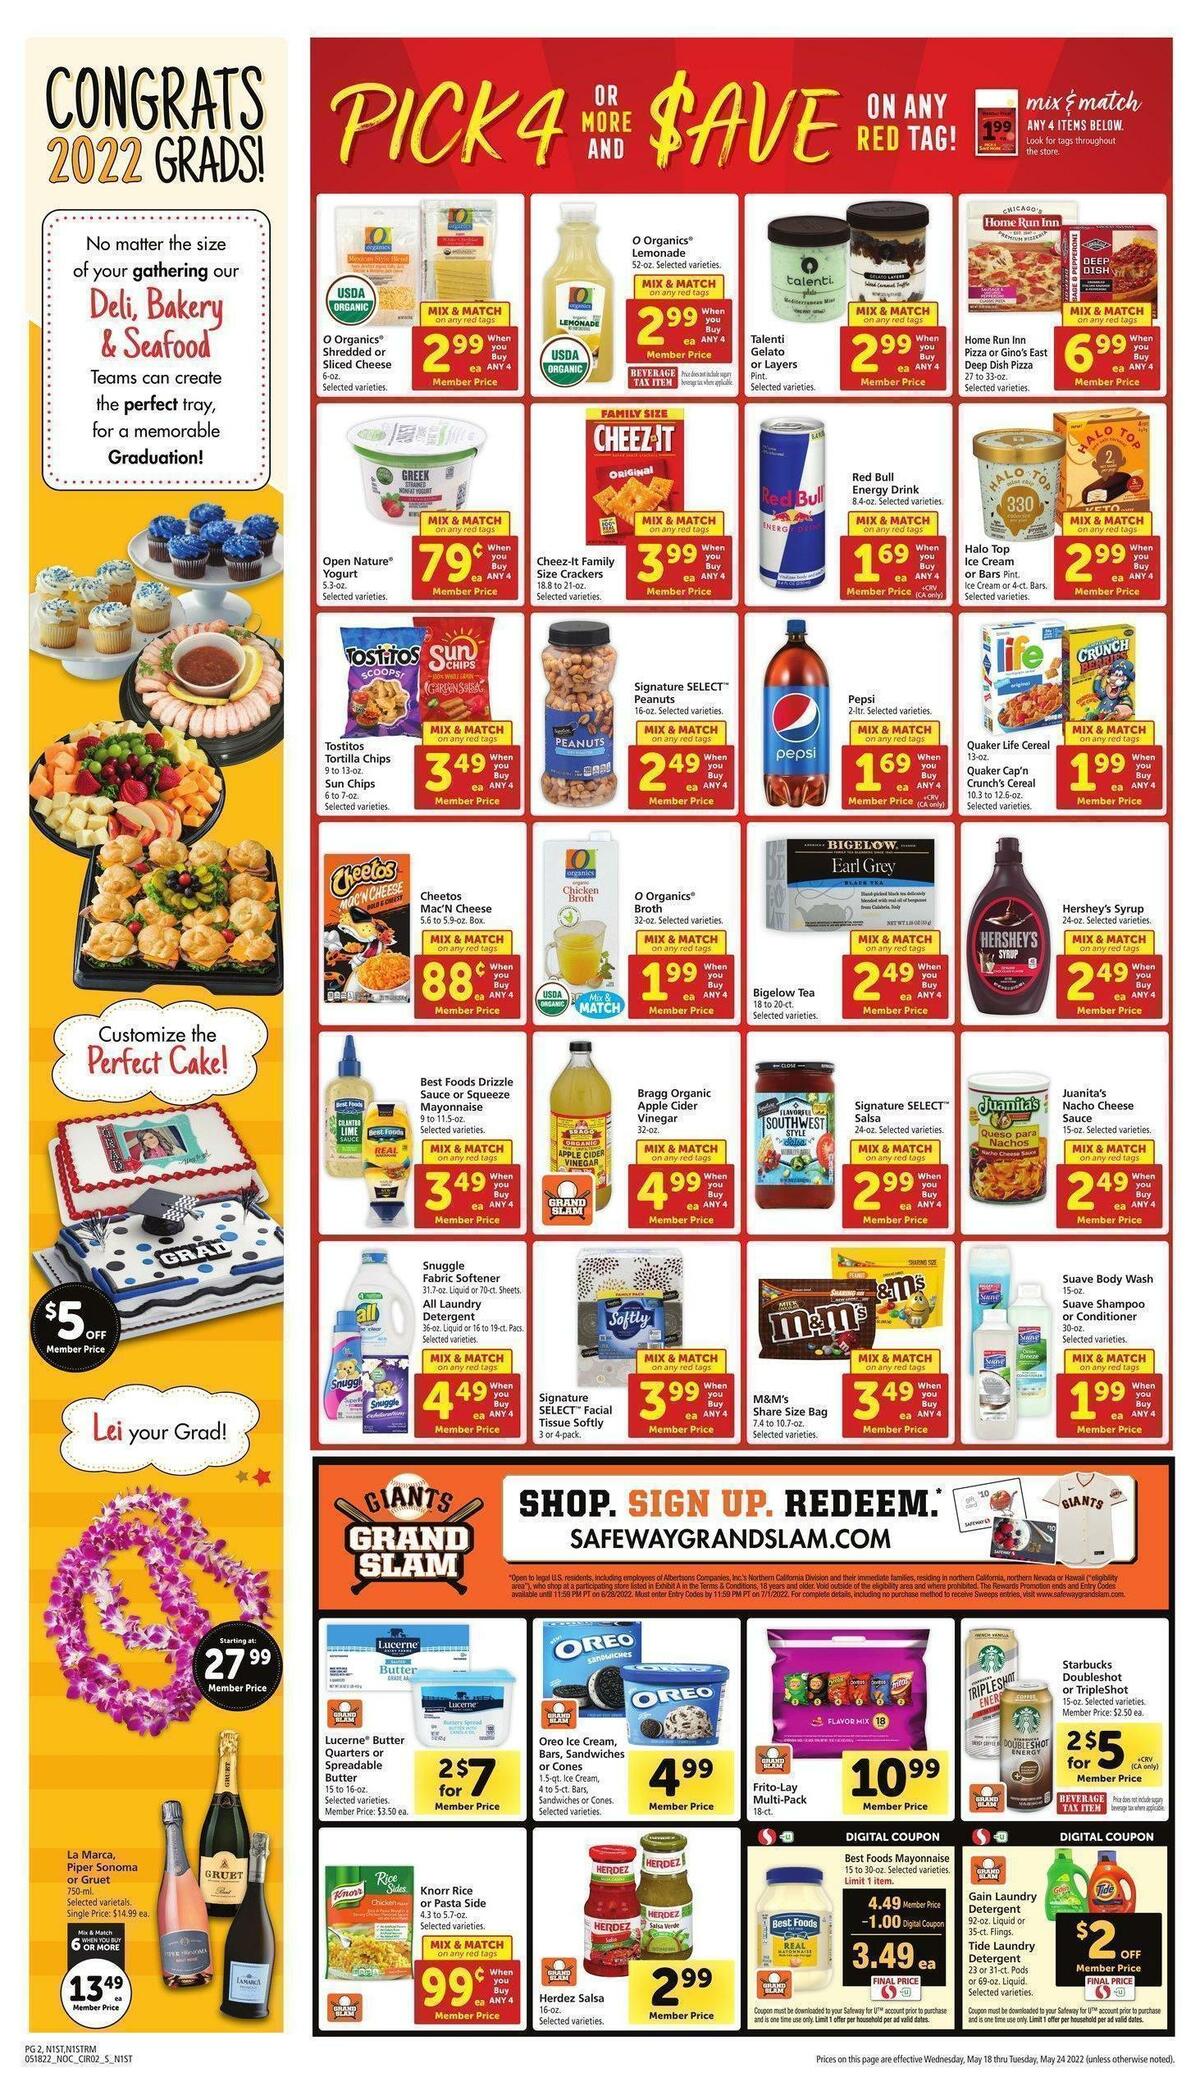 Safeway Weekly Ad from May 18